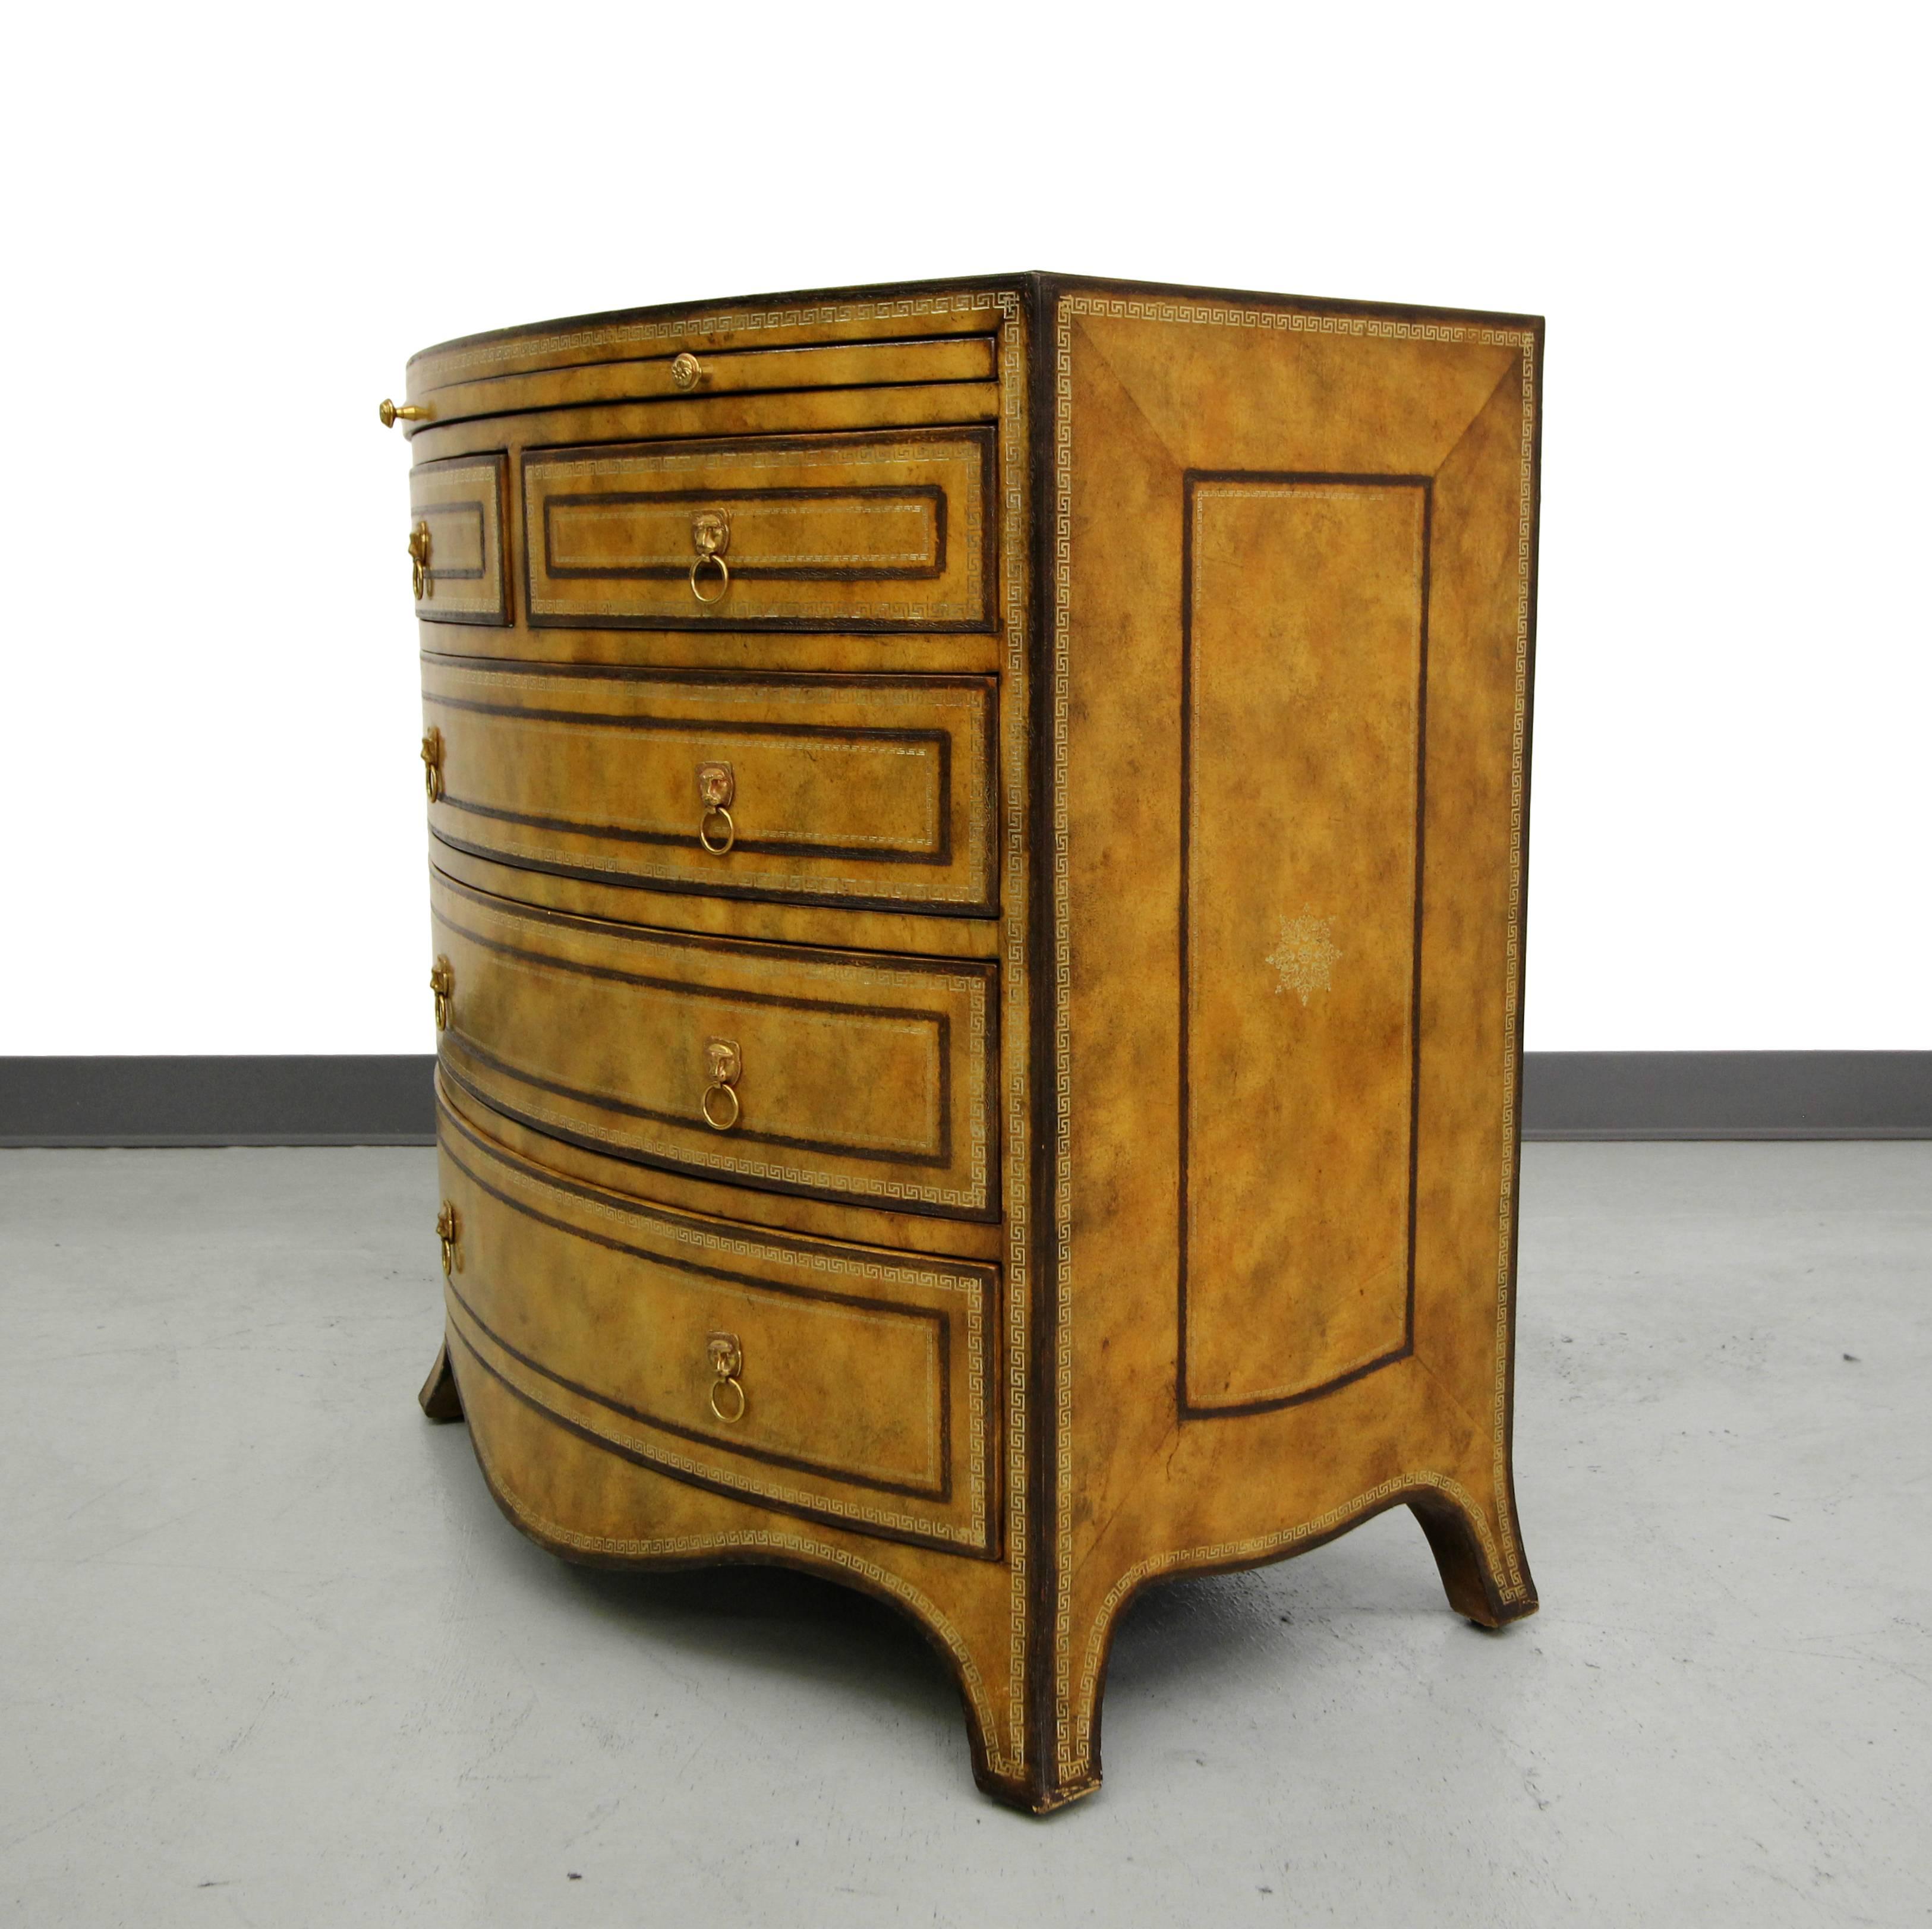 This petite bow front, leather covered chest is a gorgeous example of Classic Maitland-Smith craftsmanship. Would make the perfect entry chest or oversized nightstand.

Chest is covered in leather, with painted details and brass lions head drawer